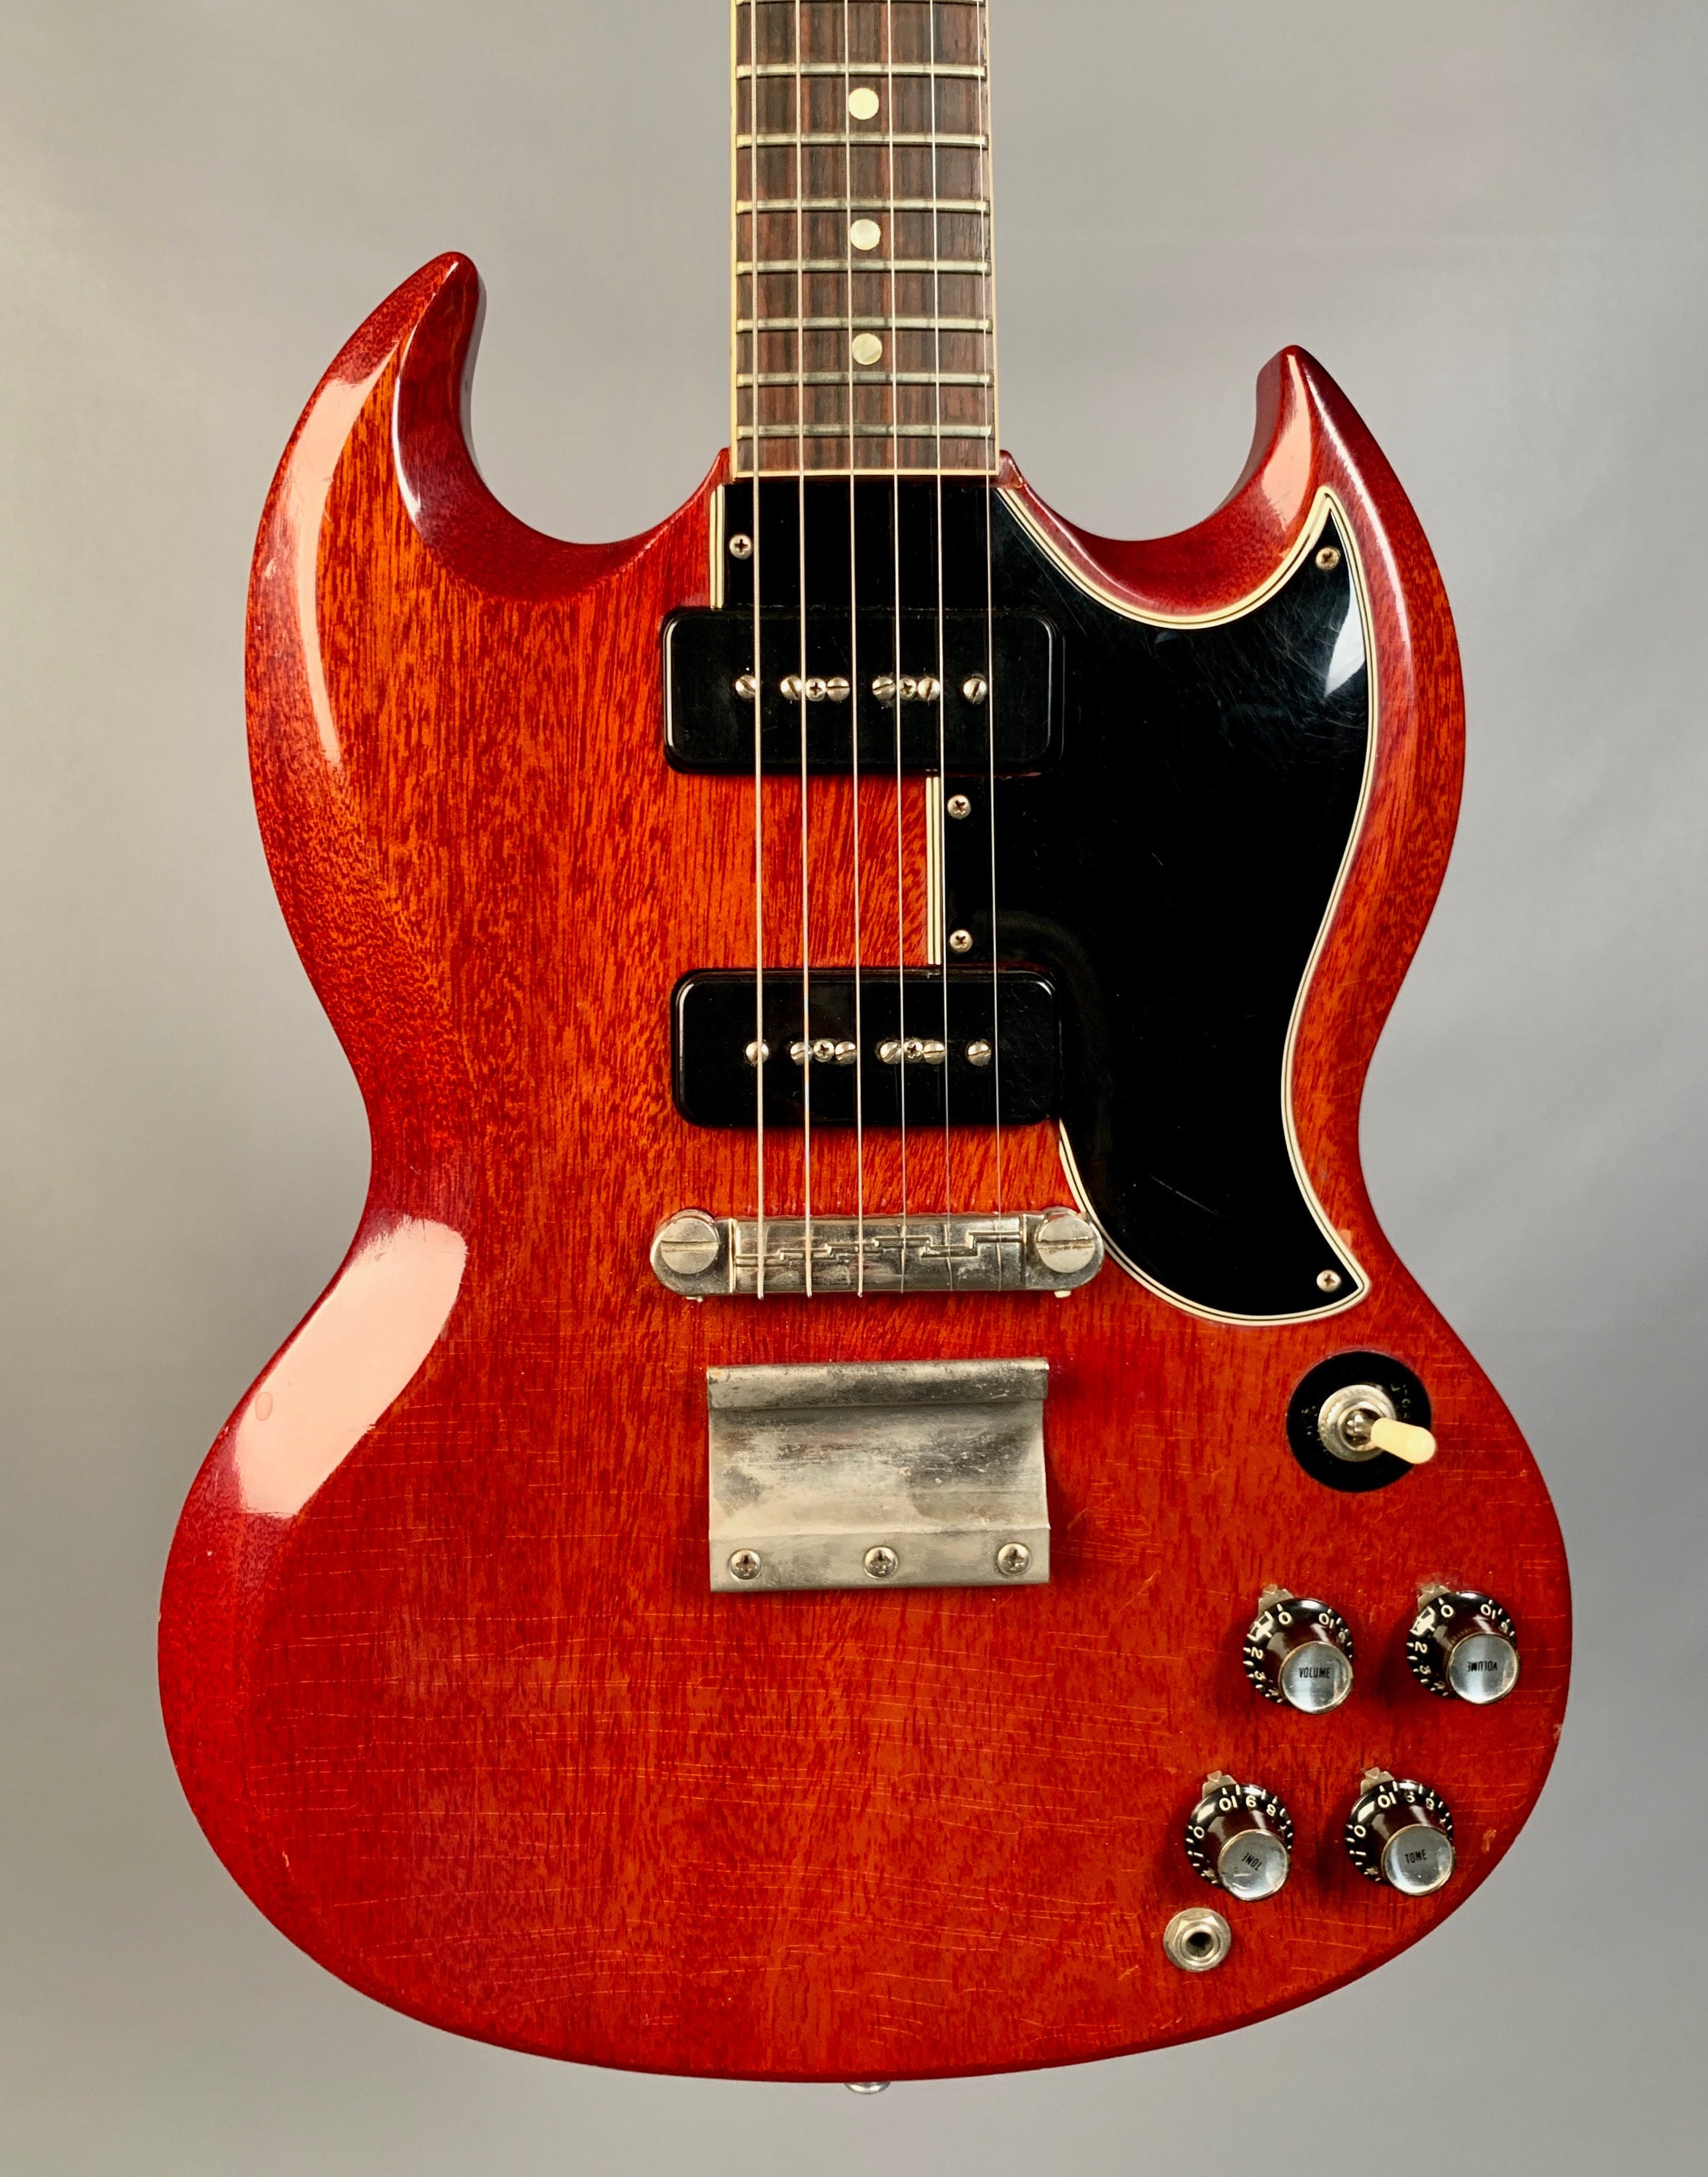 Gibson SG Special (Wide Neck) 1965 Cherry vintage les paul